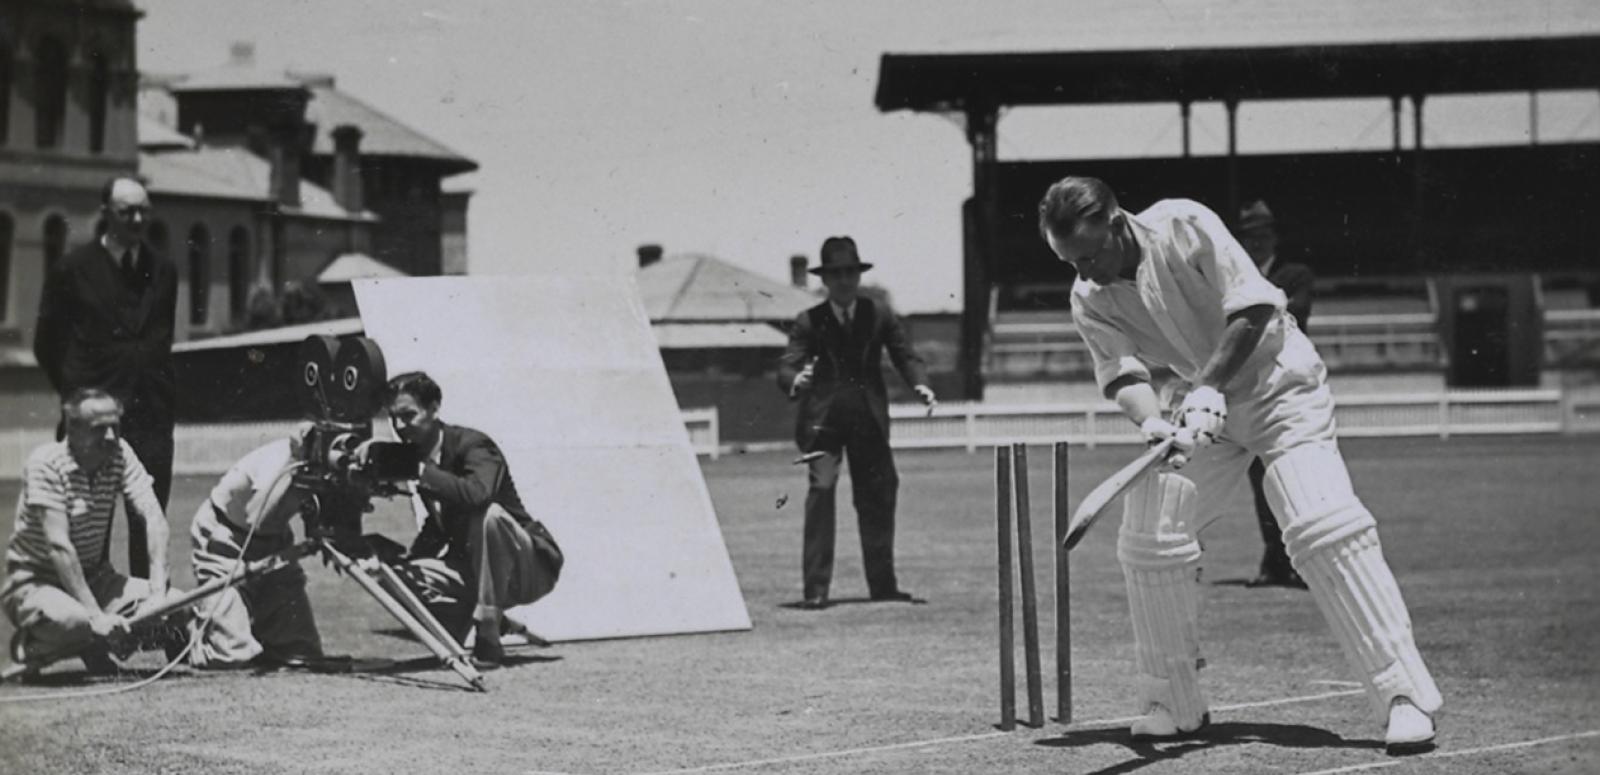 Donald Bradman batting in front of wickets while a film crew films him from behind